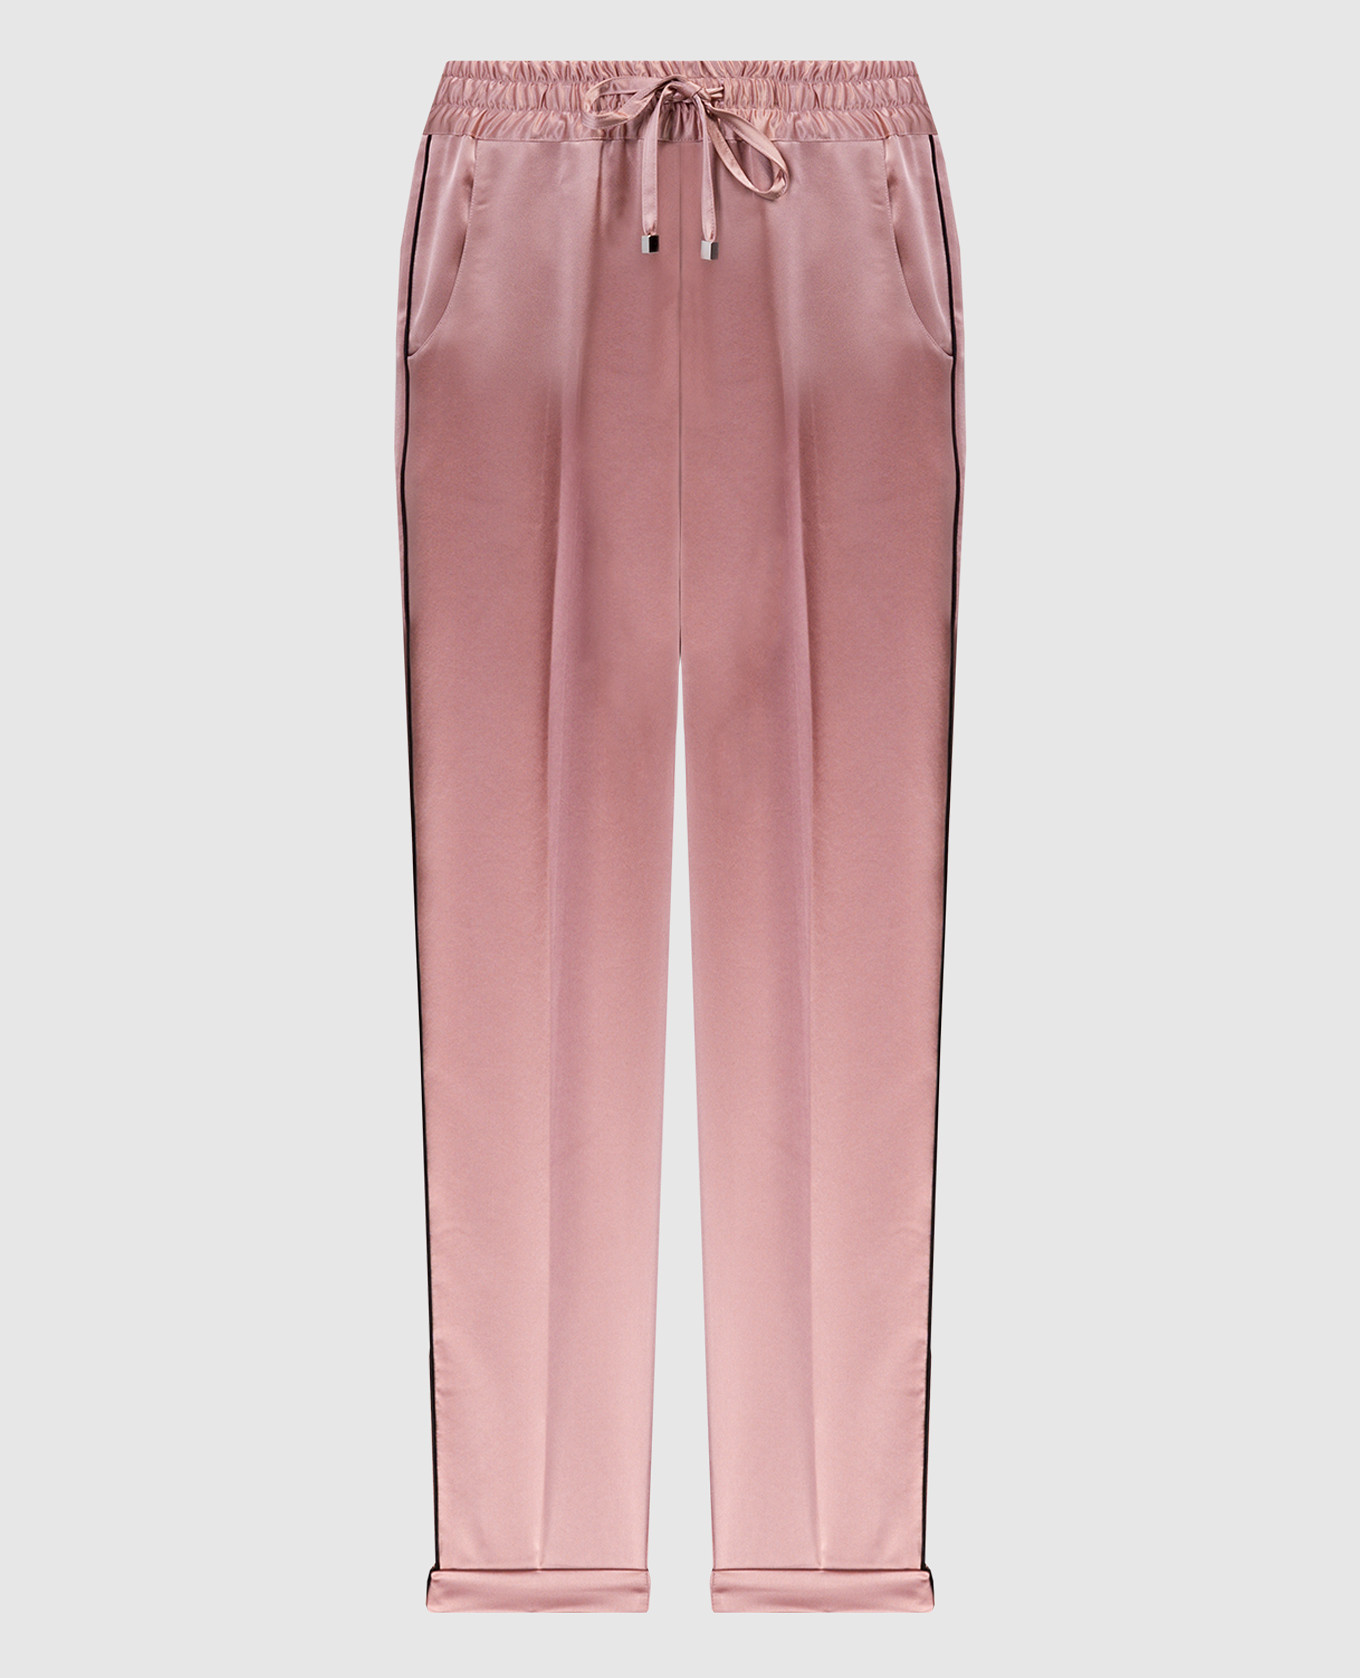 Pink pants with contrasting stripes